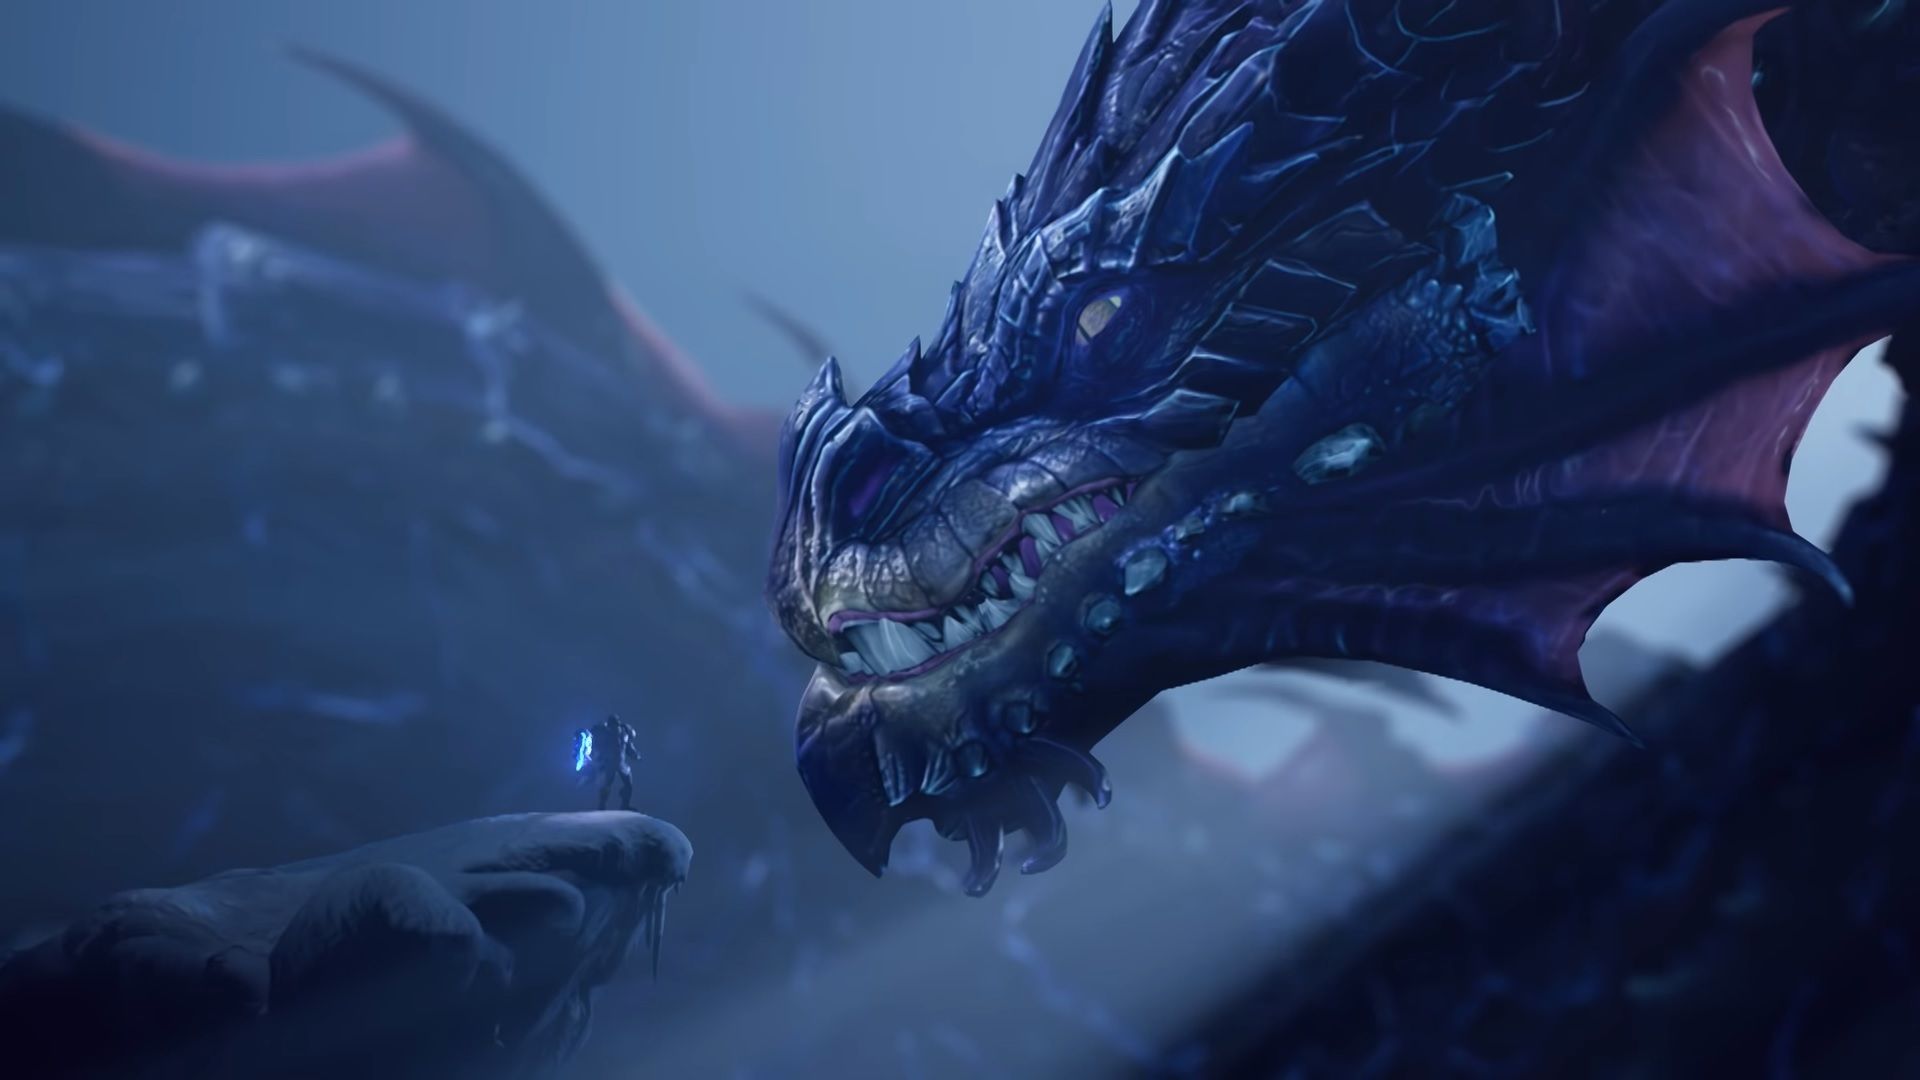 Smite introduces a new god, and he's a humongous snake